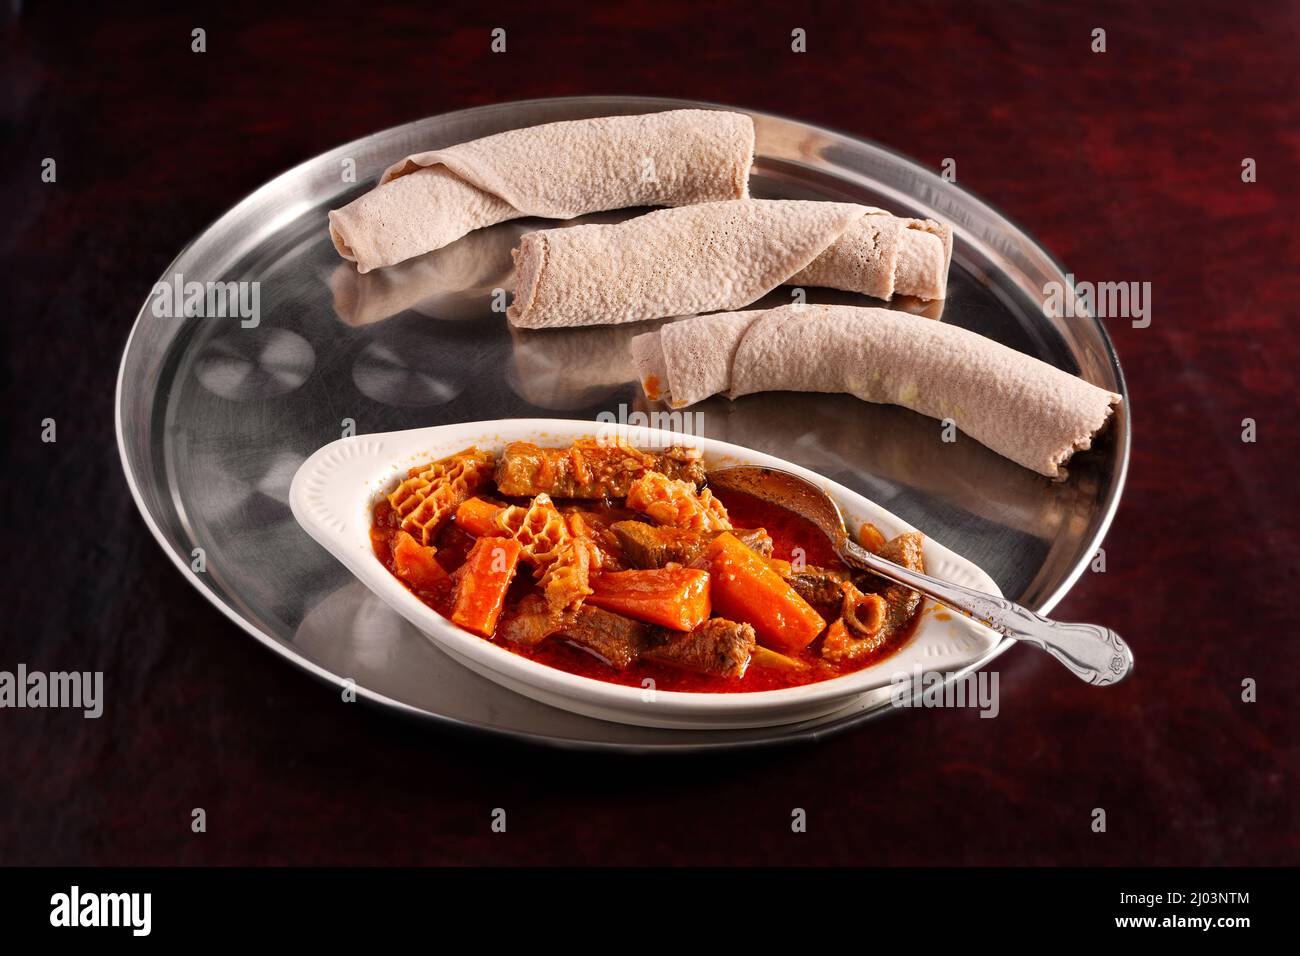 Ethiopian Melas sember with injera bread in a silver platter Stock Photo